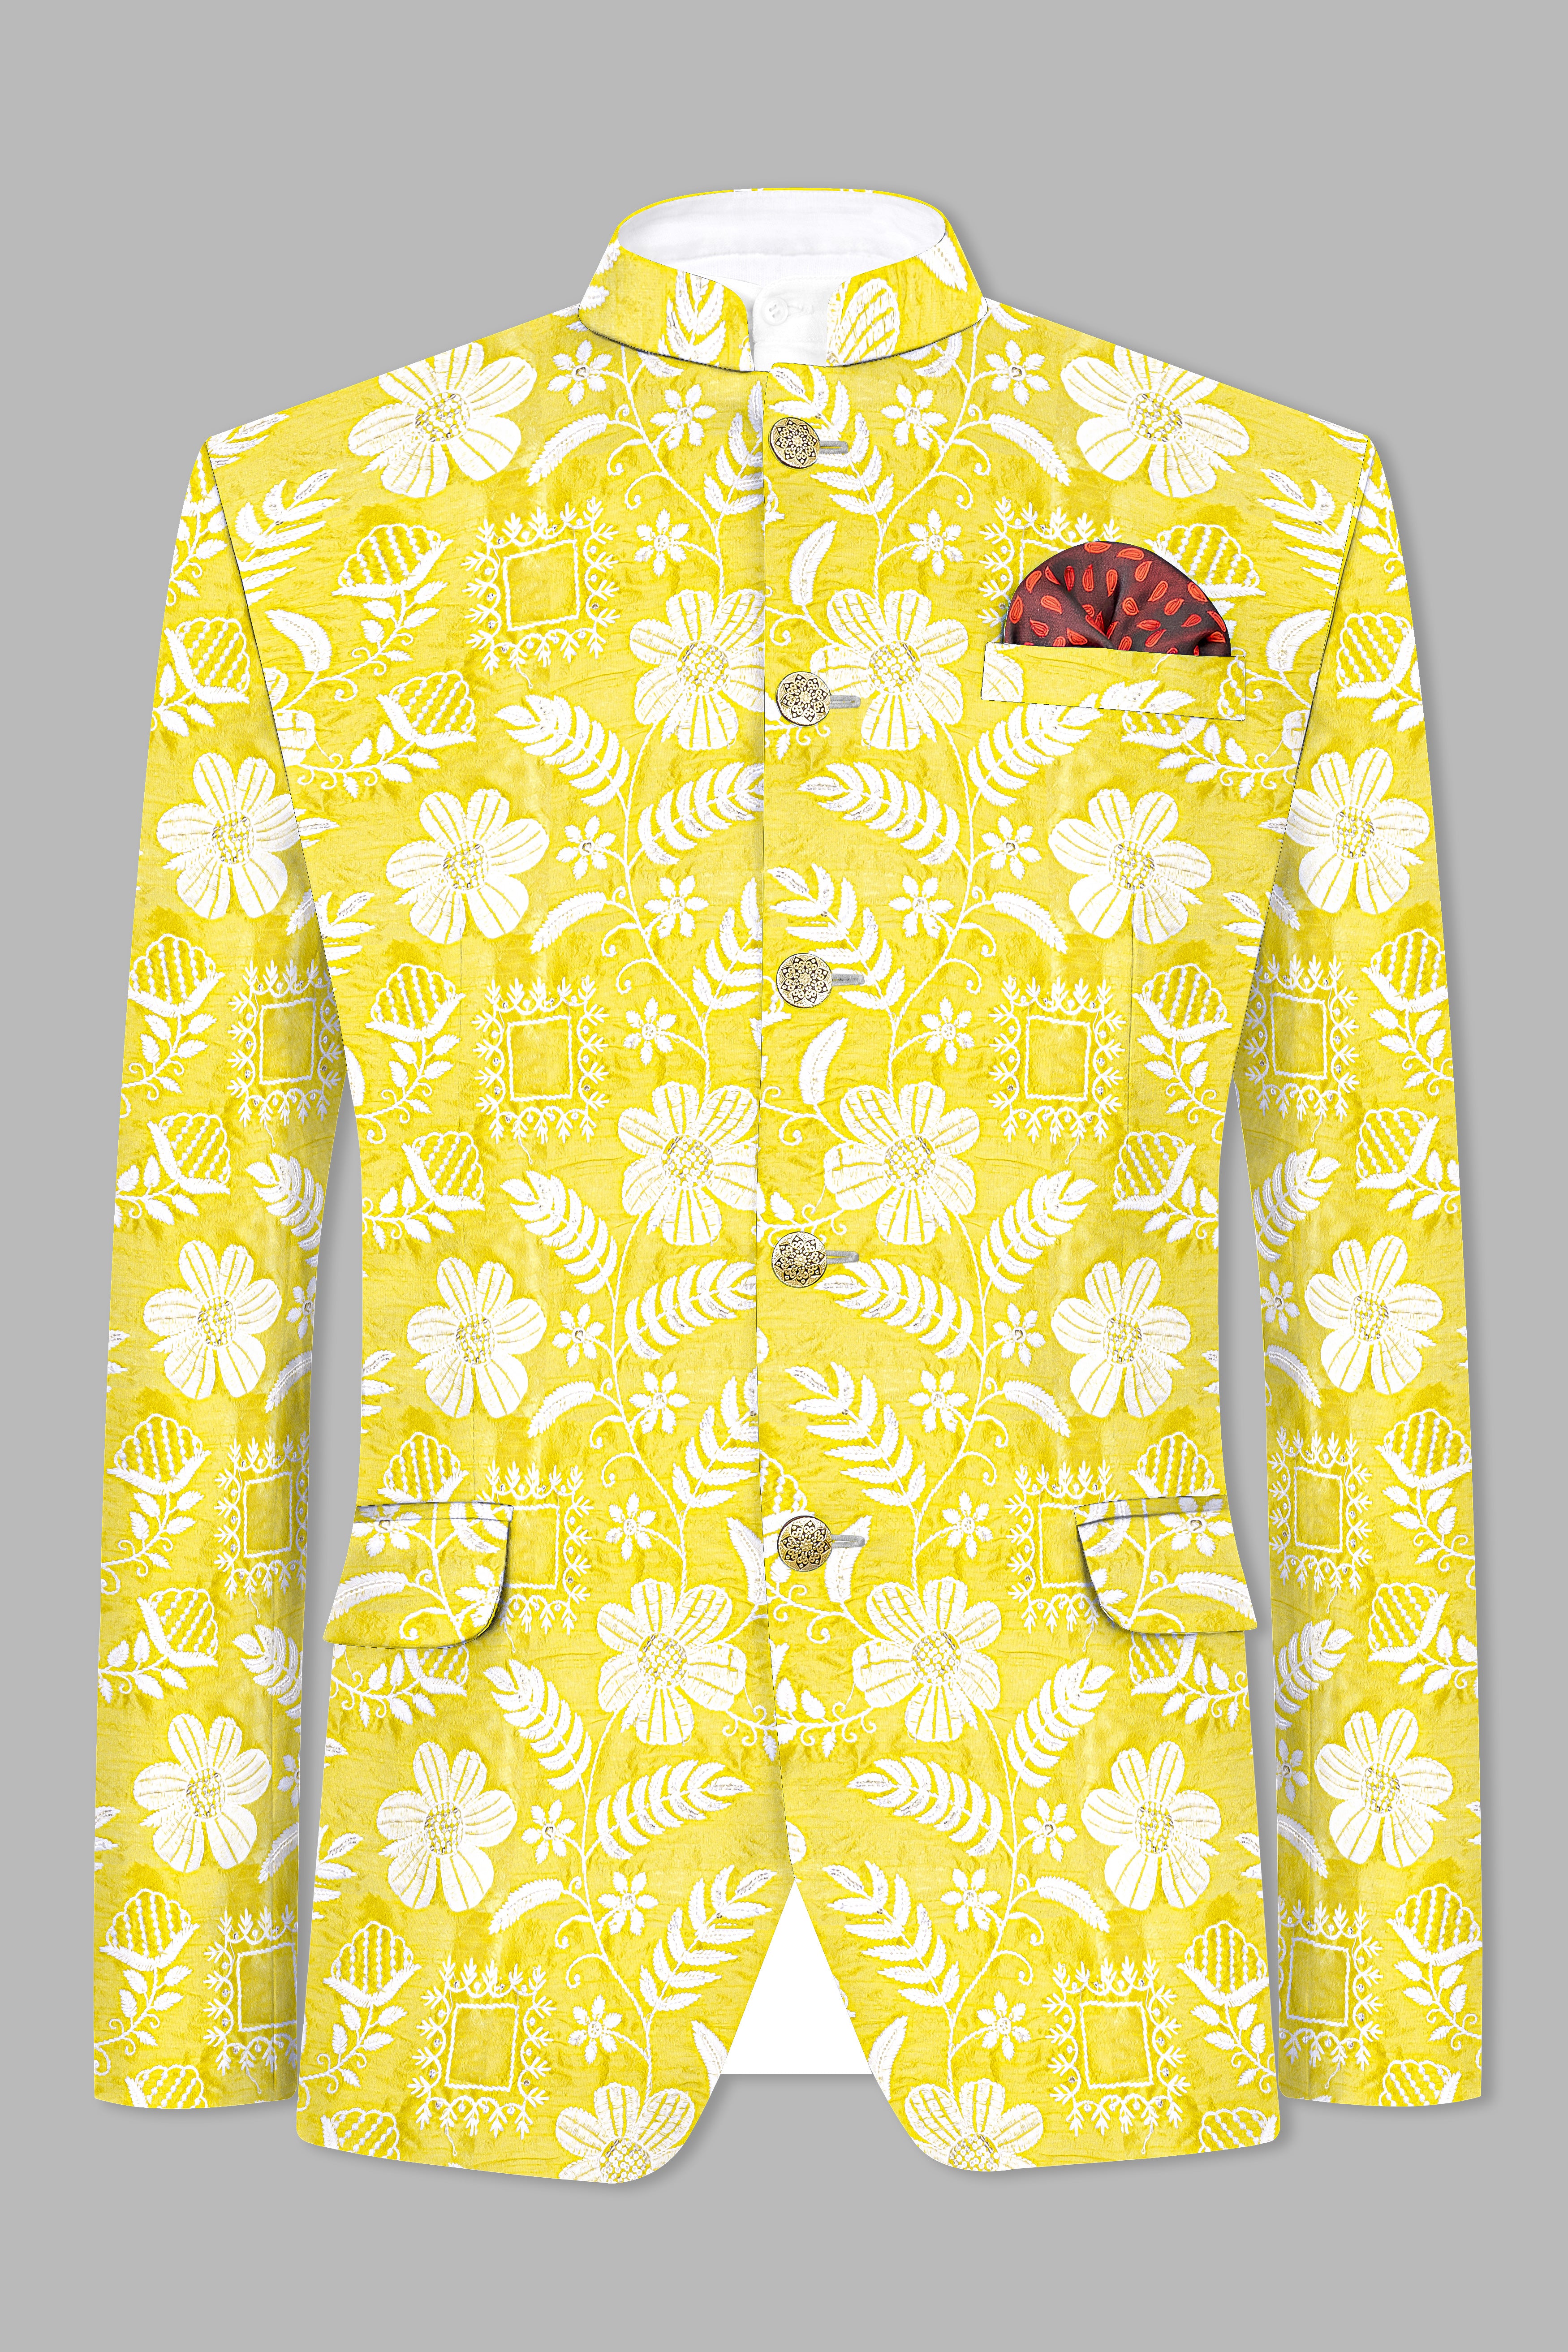 Dandelion Yellow And Bright White Floral Sequin And Thread Embroidered Bandhgala Jodhpuri